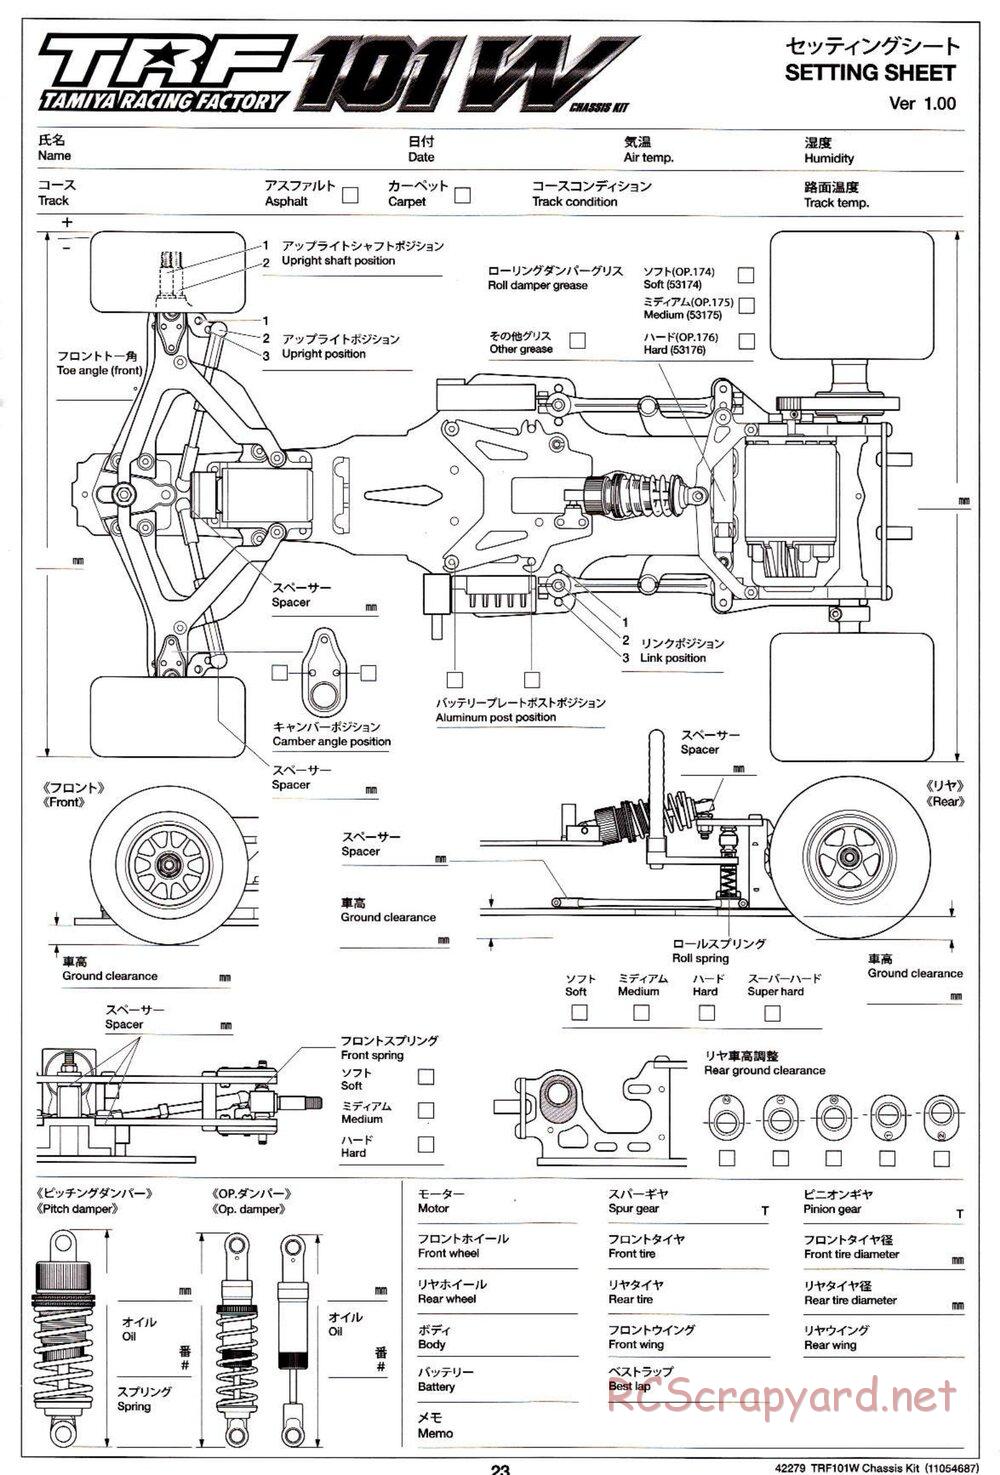 Tamiya - TRF101W Chassis Chassis - Manual - Page 23